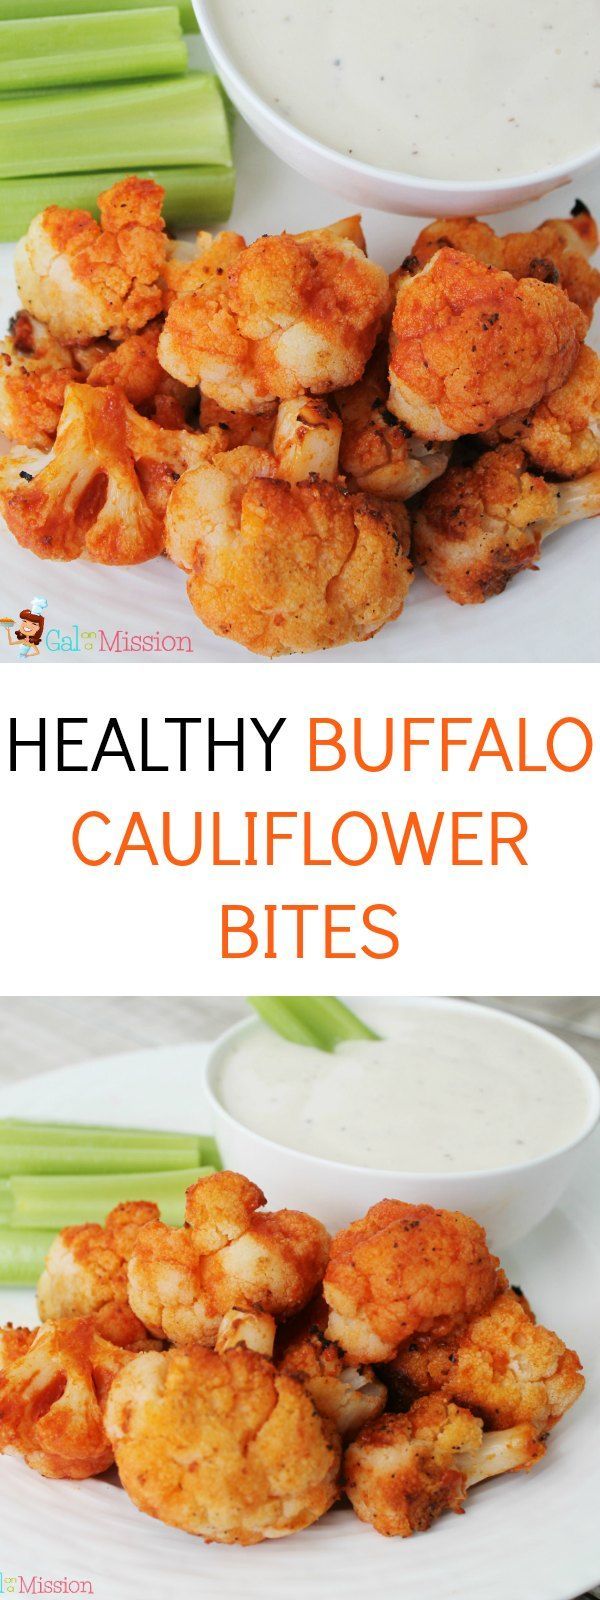 An absolutely delicious and easy healthy buffalo cauliflower bite recipe! Same flavor as buffalo wings or buffalo chicken dip – just